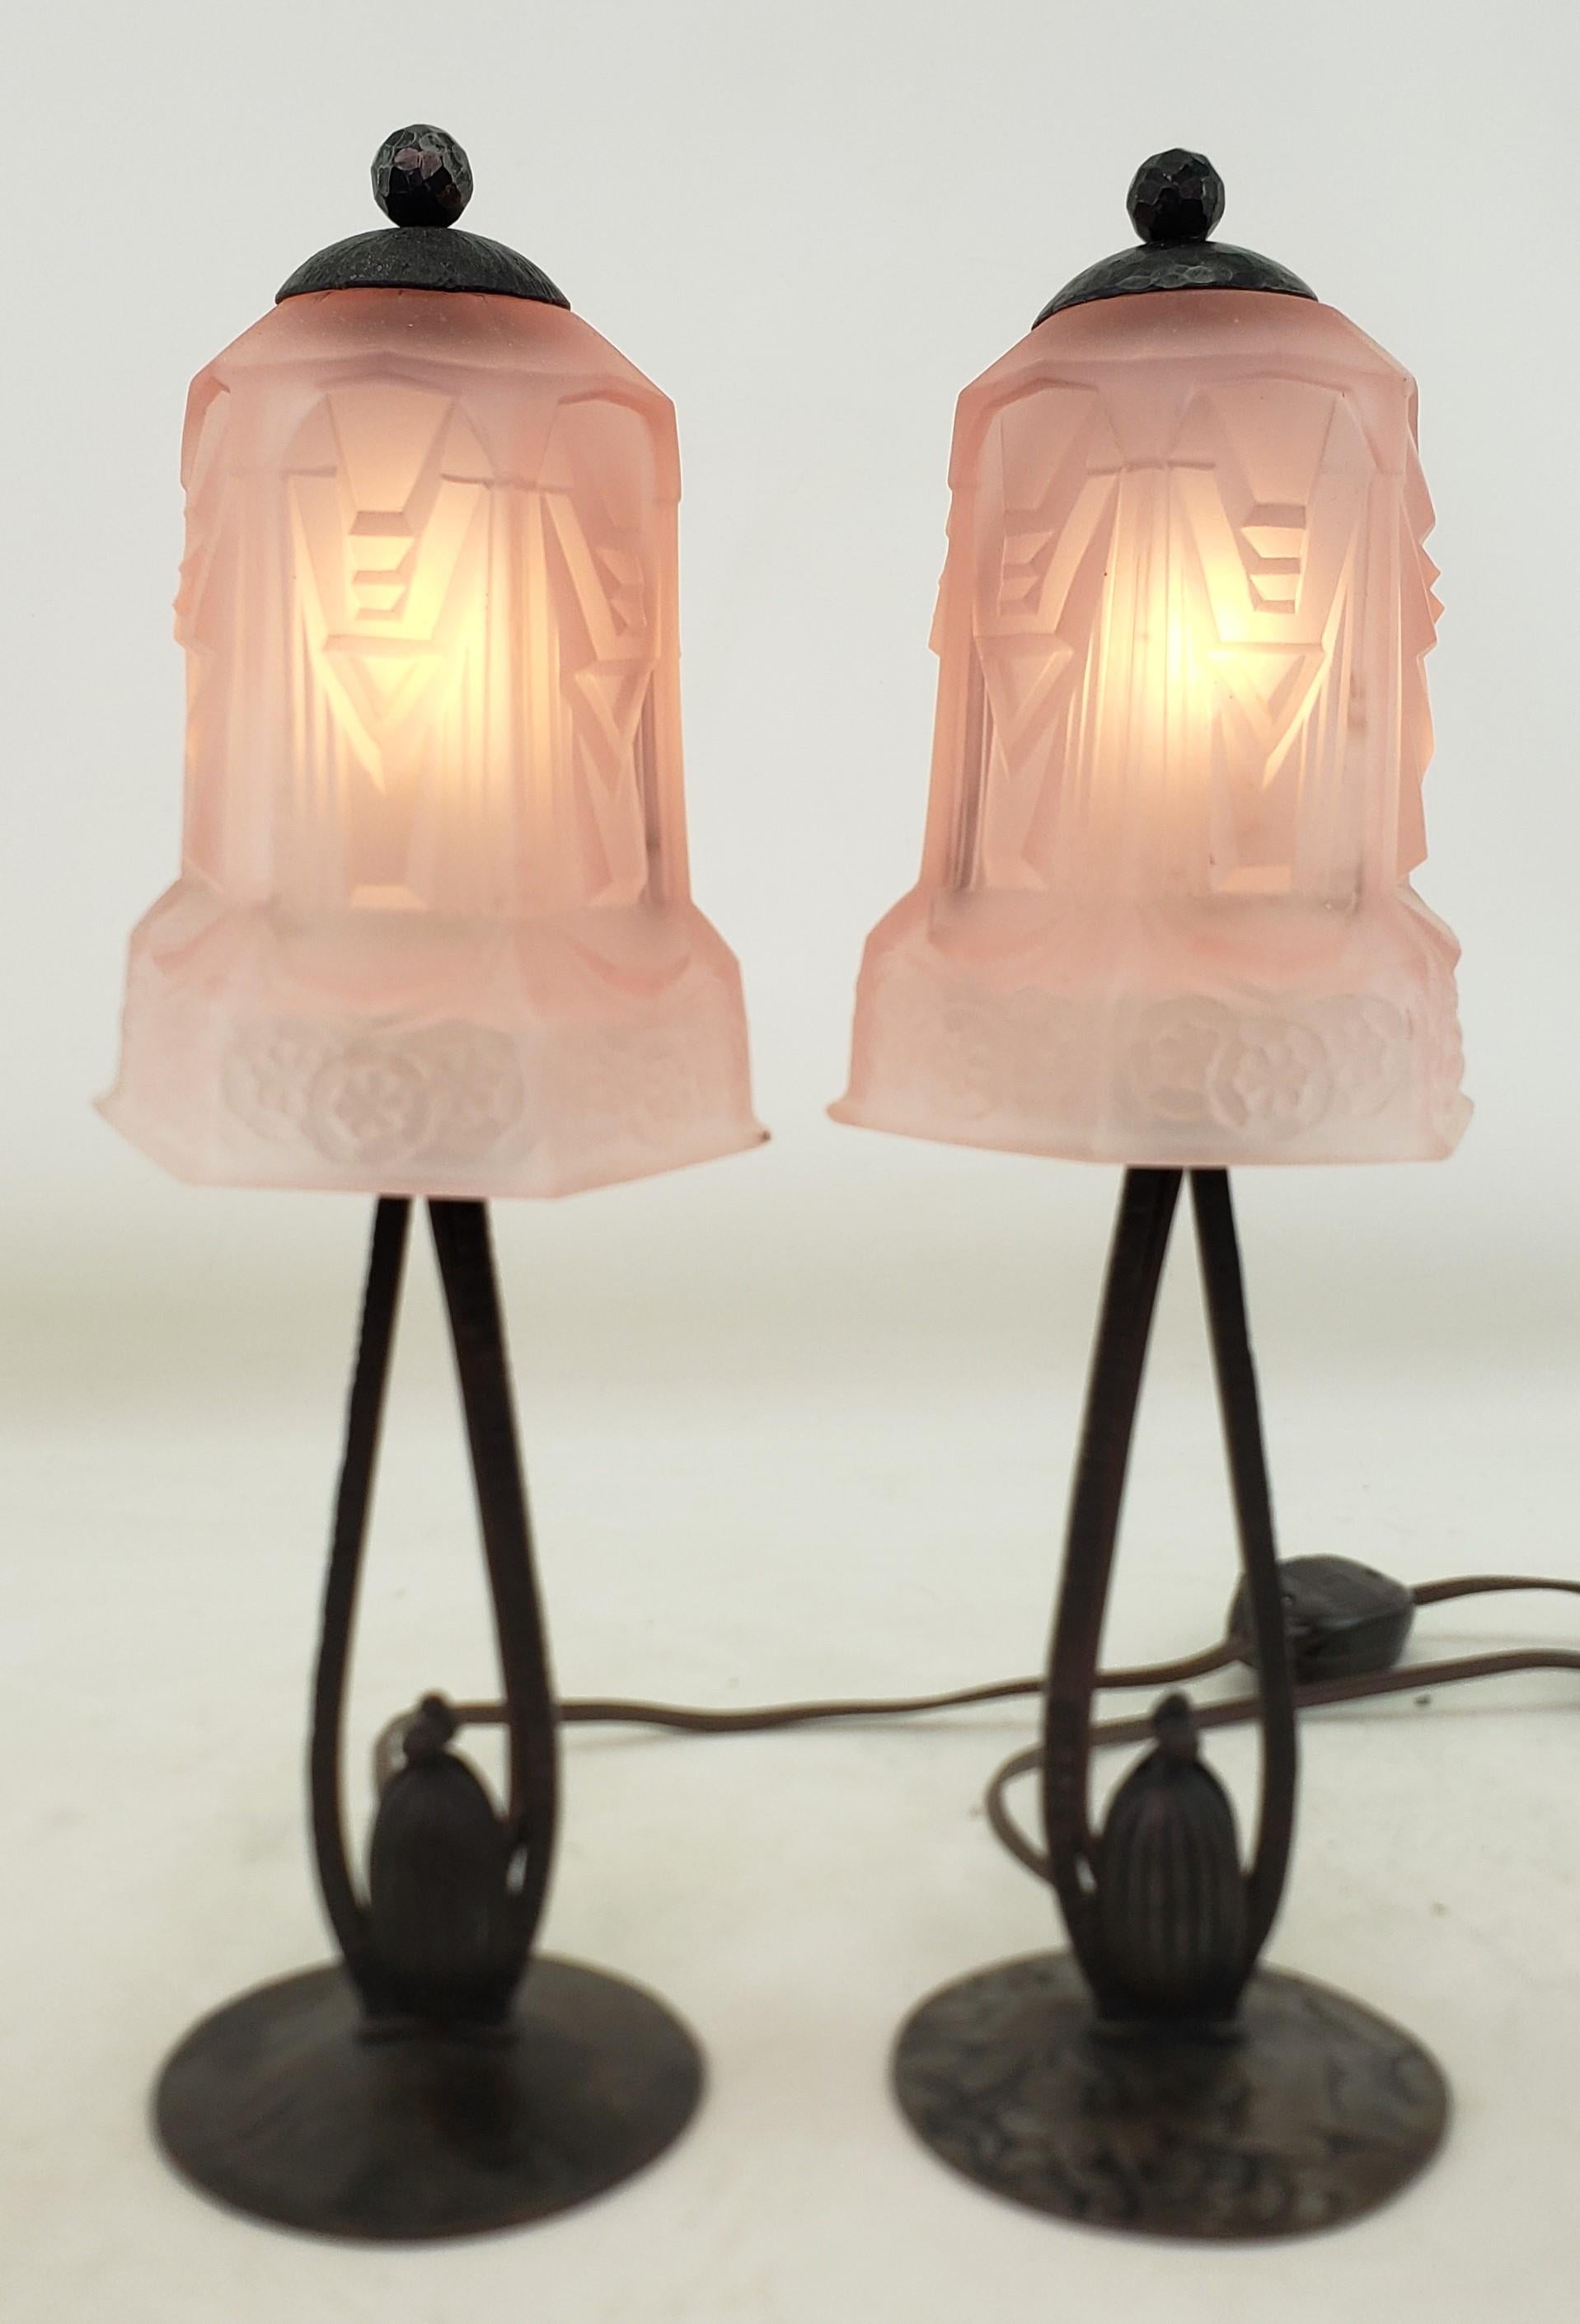 This pair of small antique table lamps are unsigned, but presumed to have originated from France and date to approximately 1920 and done in the period Art Deco style. The lamp bases are composed of bronze patinated steel and the shades are done with